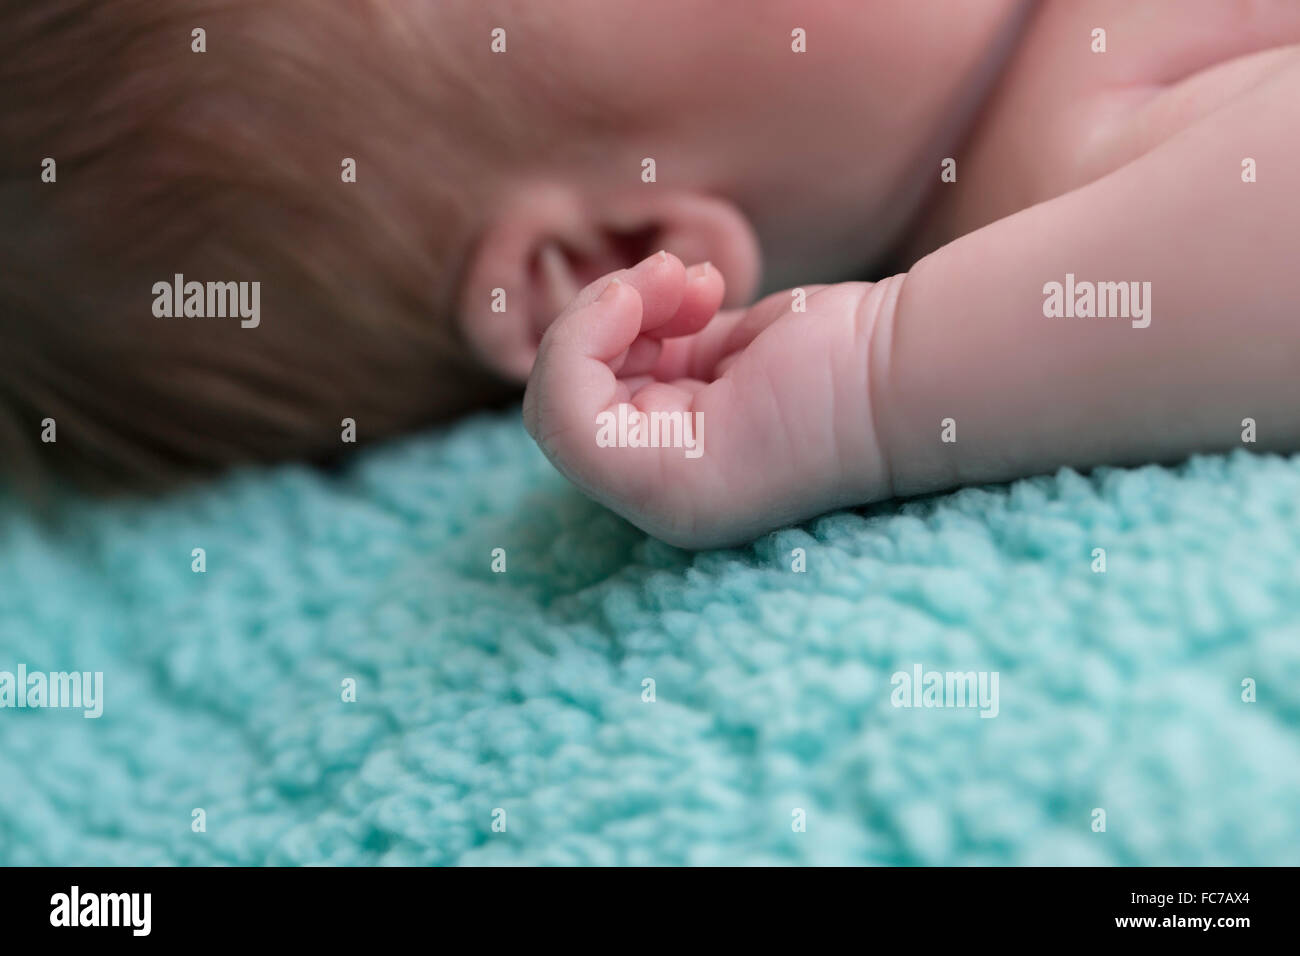 Close up view of tiny hand and ear of a one month old baby boy Stock Photo